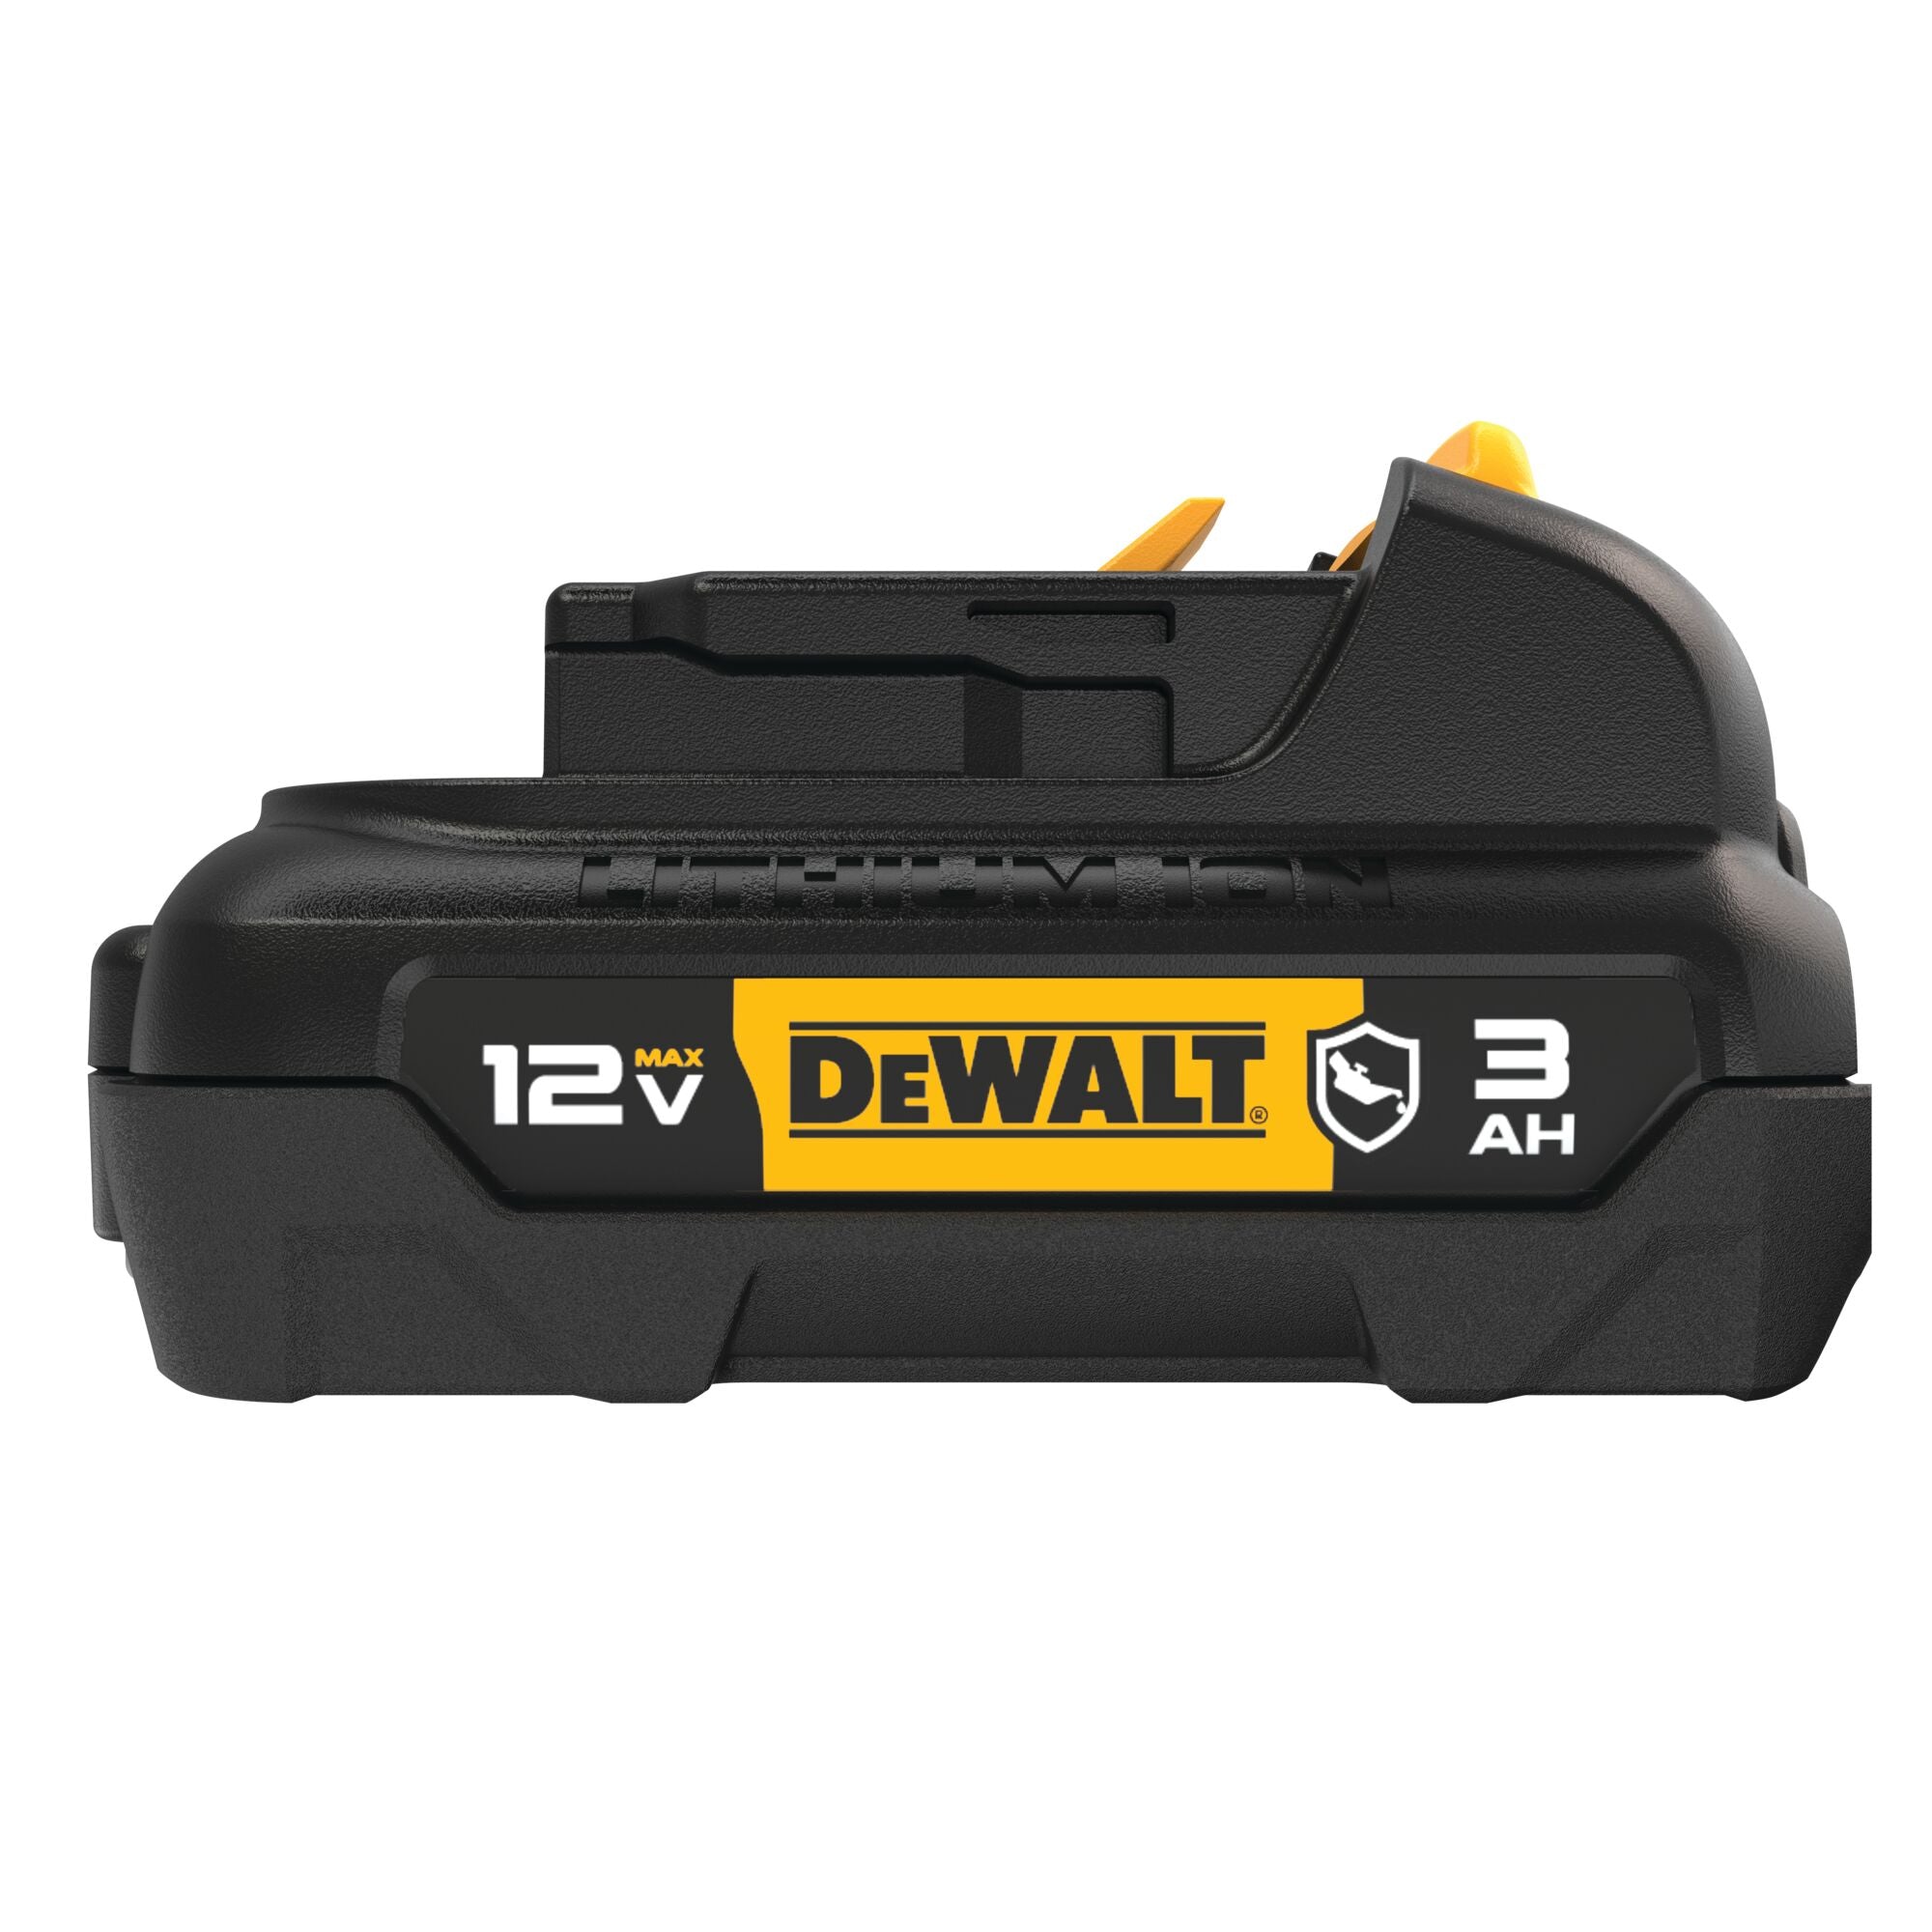 12V MAX Oil-Resistant Lithium-Ion 3.0Ah Battery